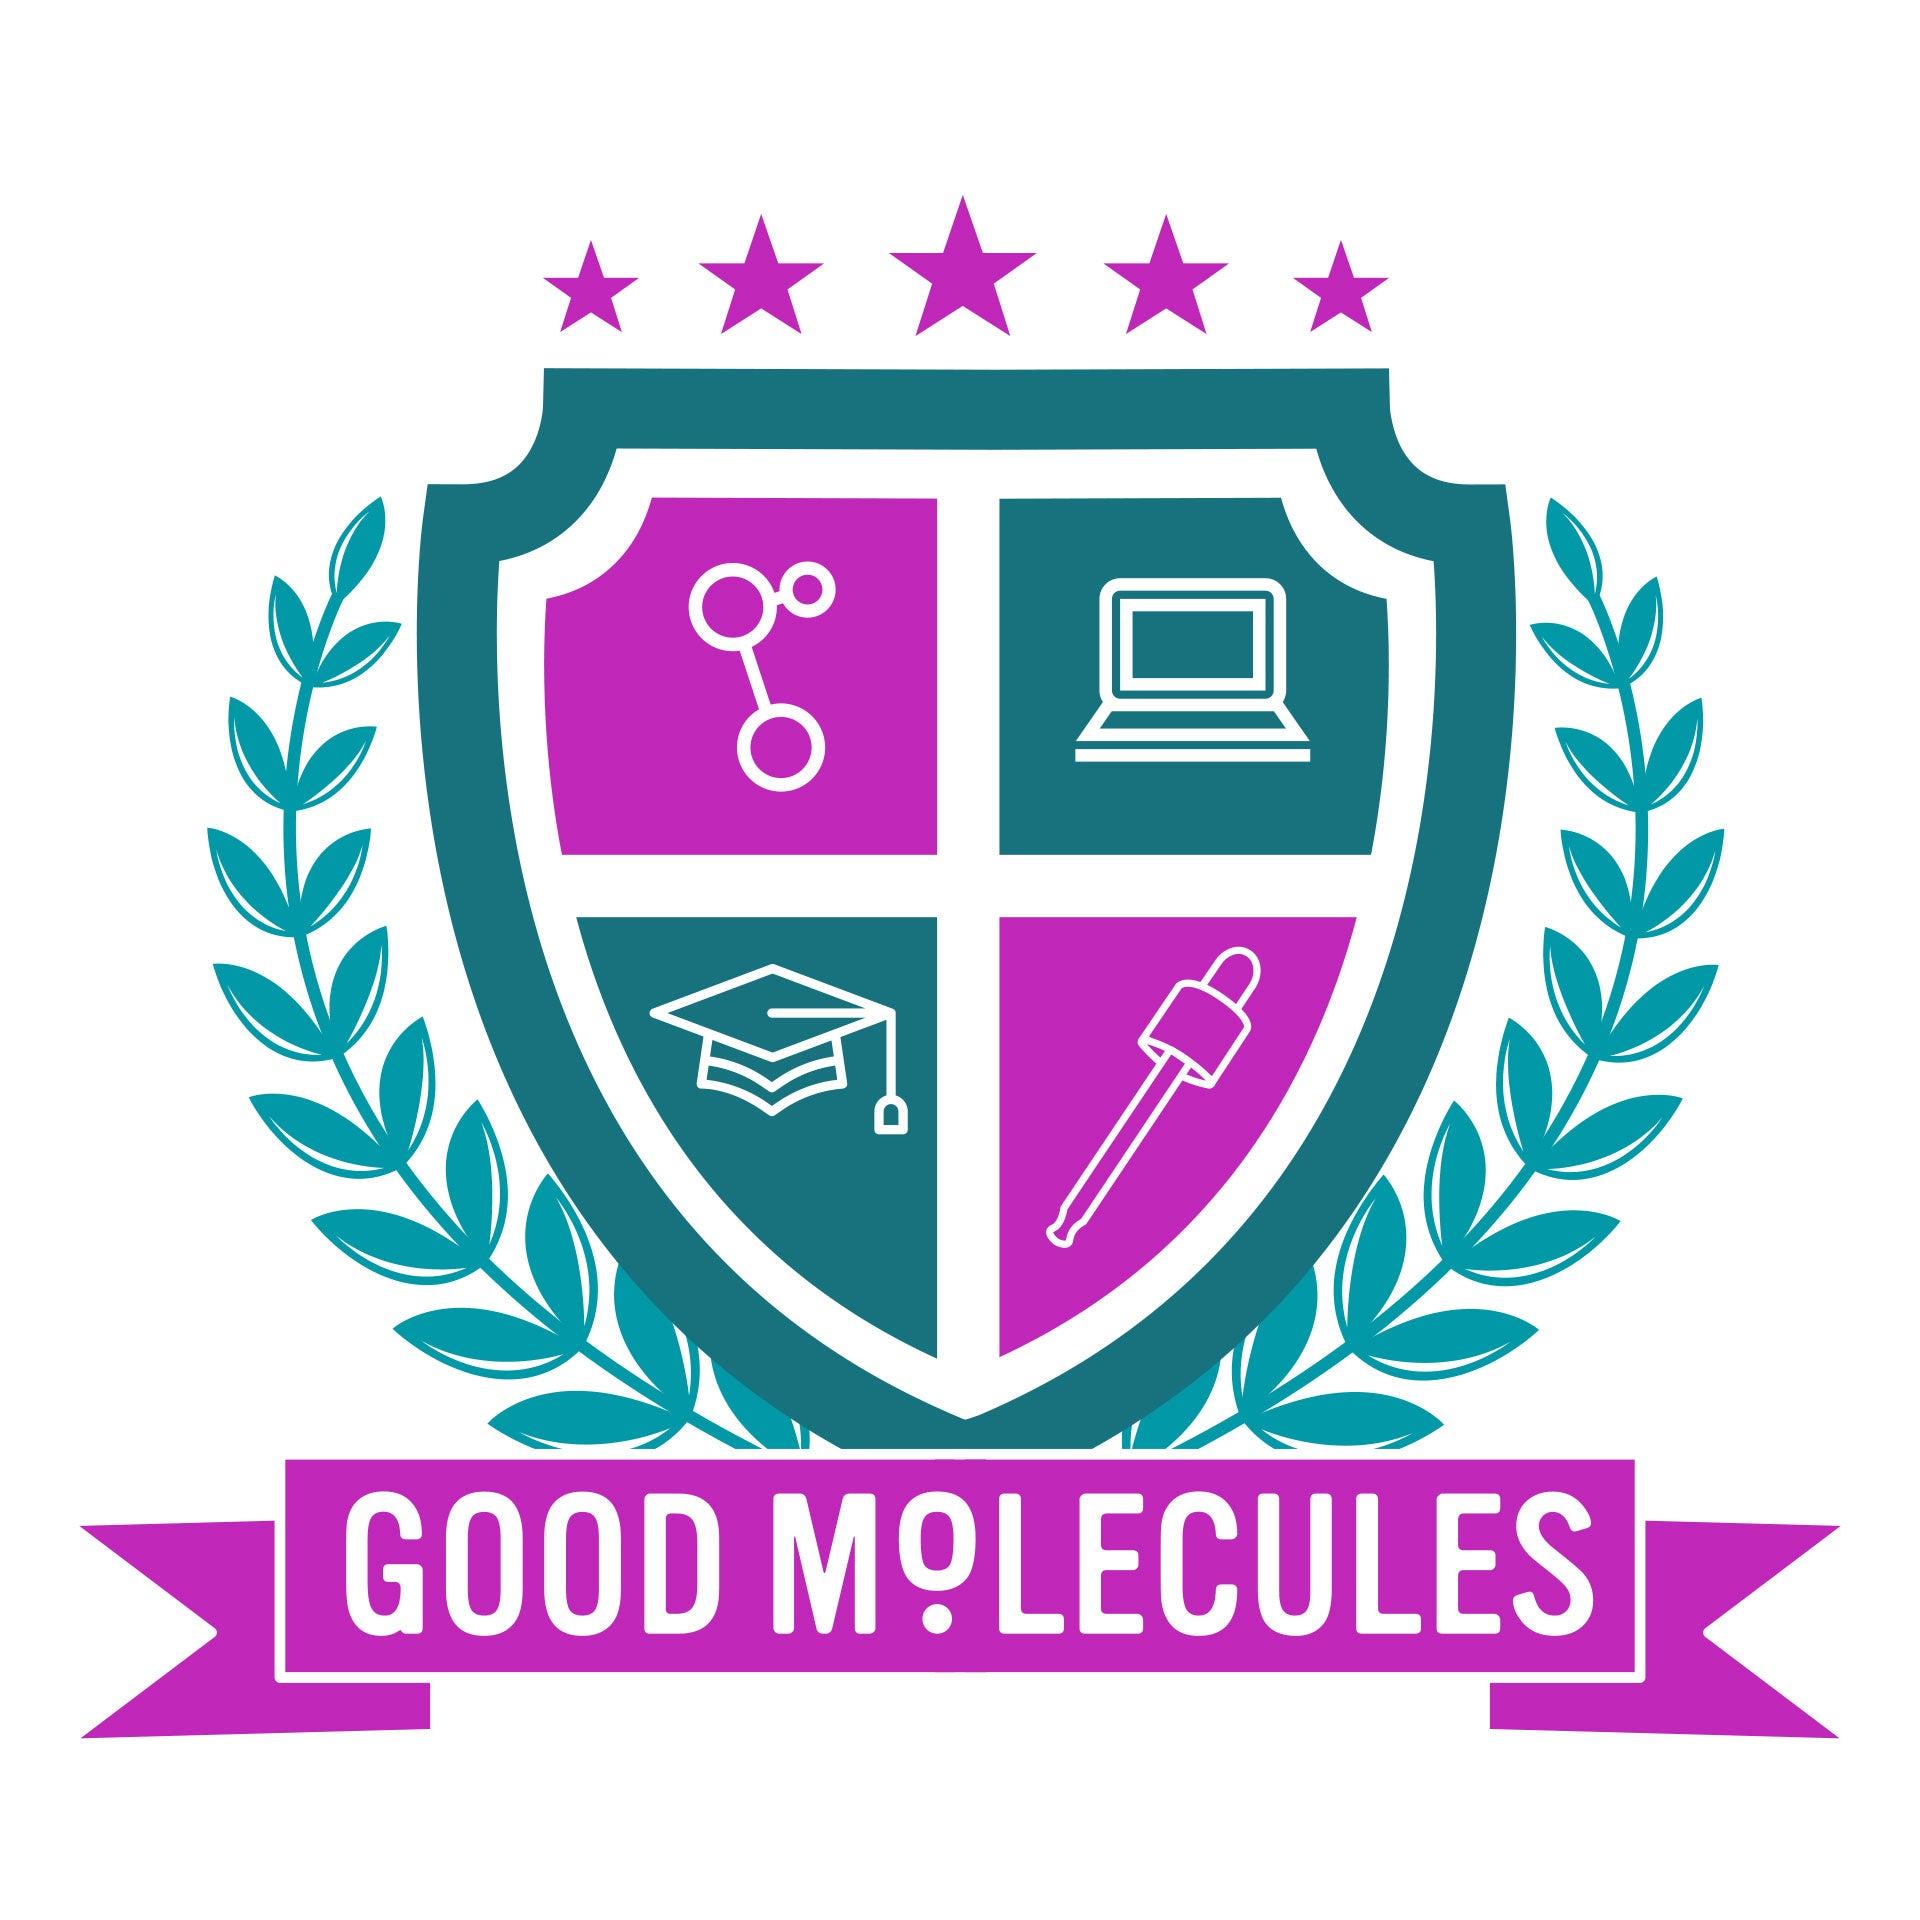 Good Molecules is coming to Indiana University Bloomington!